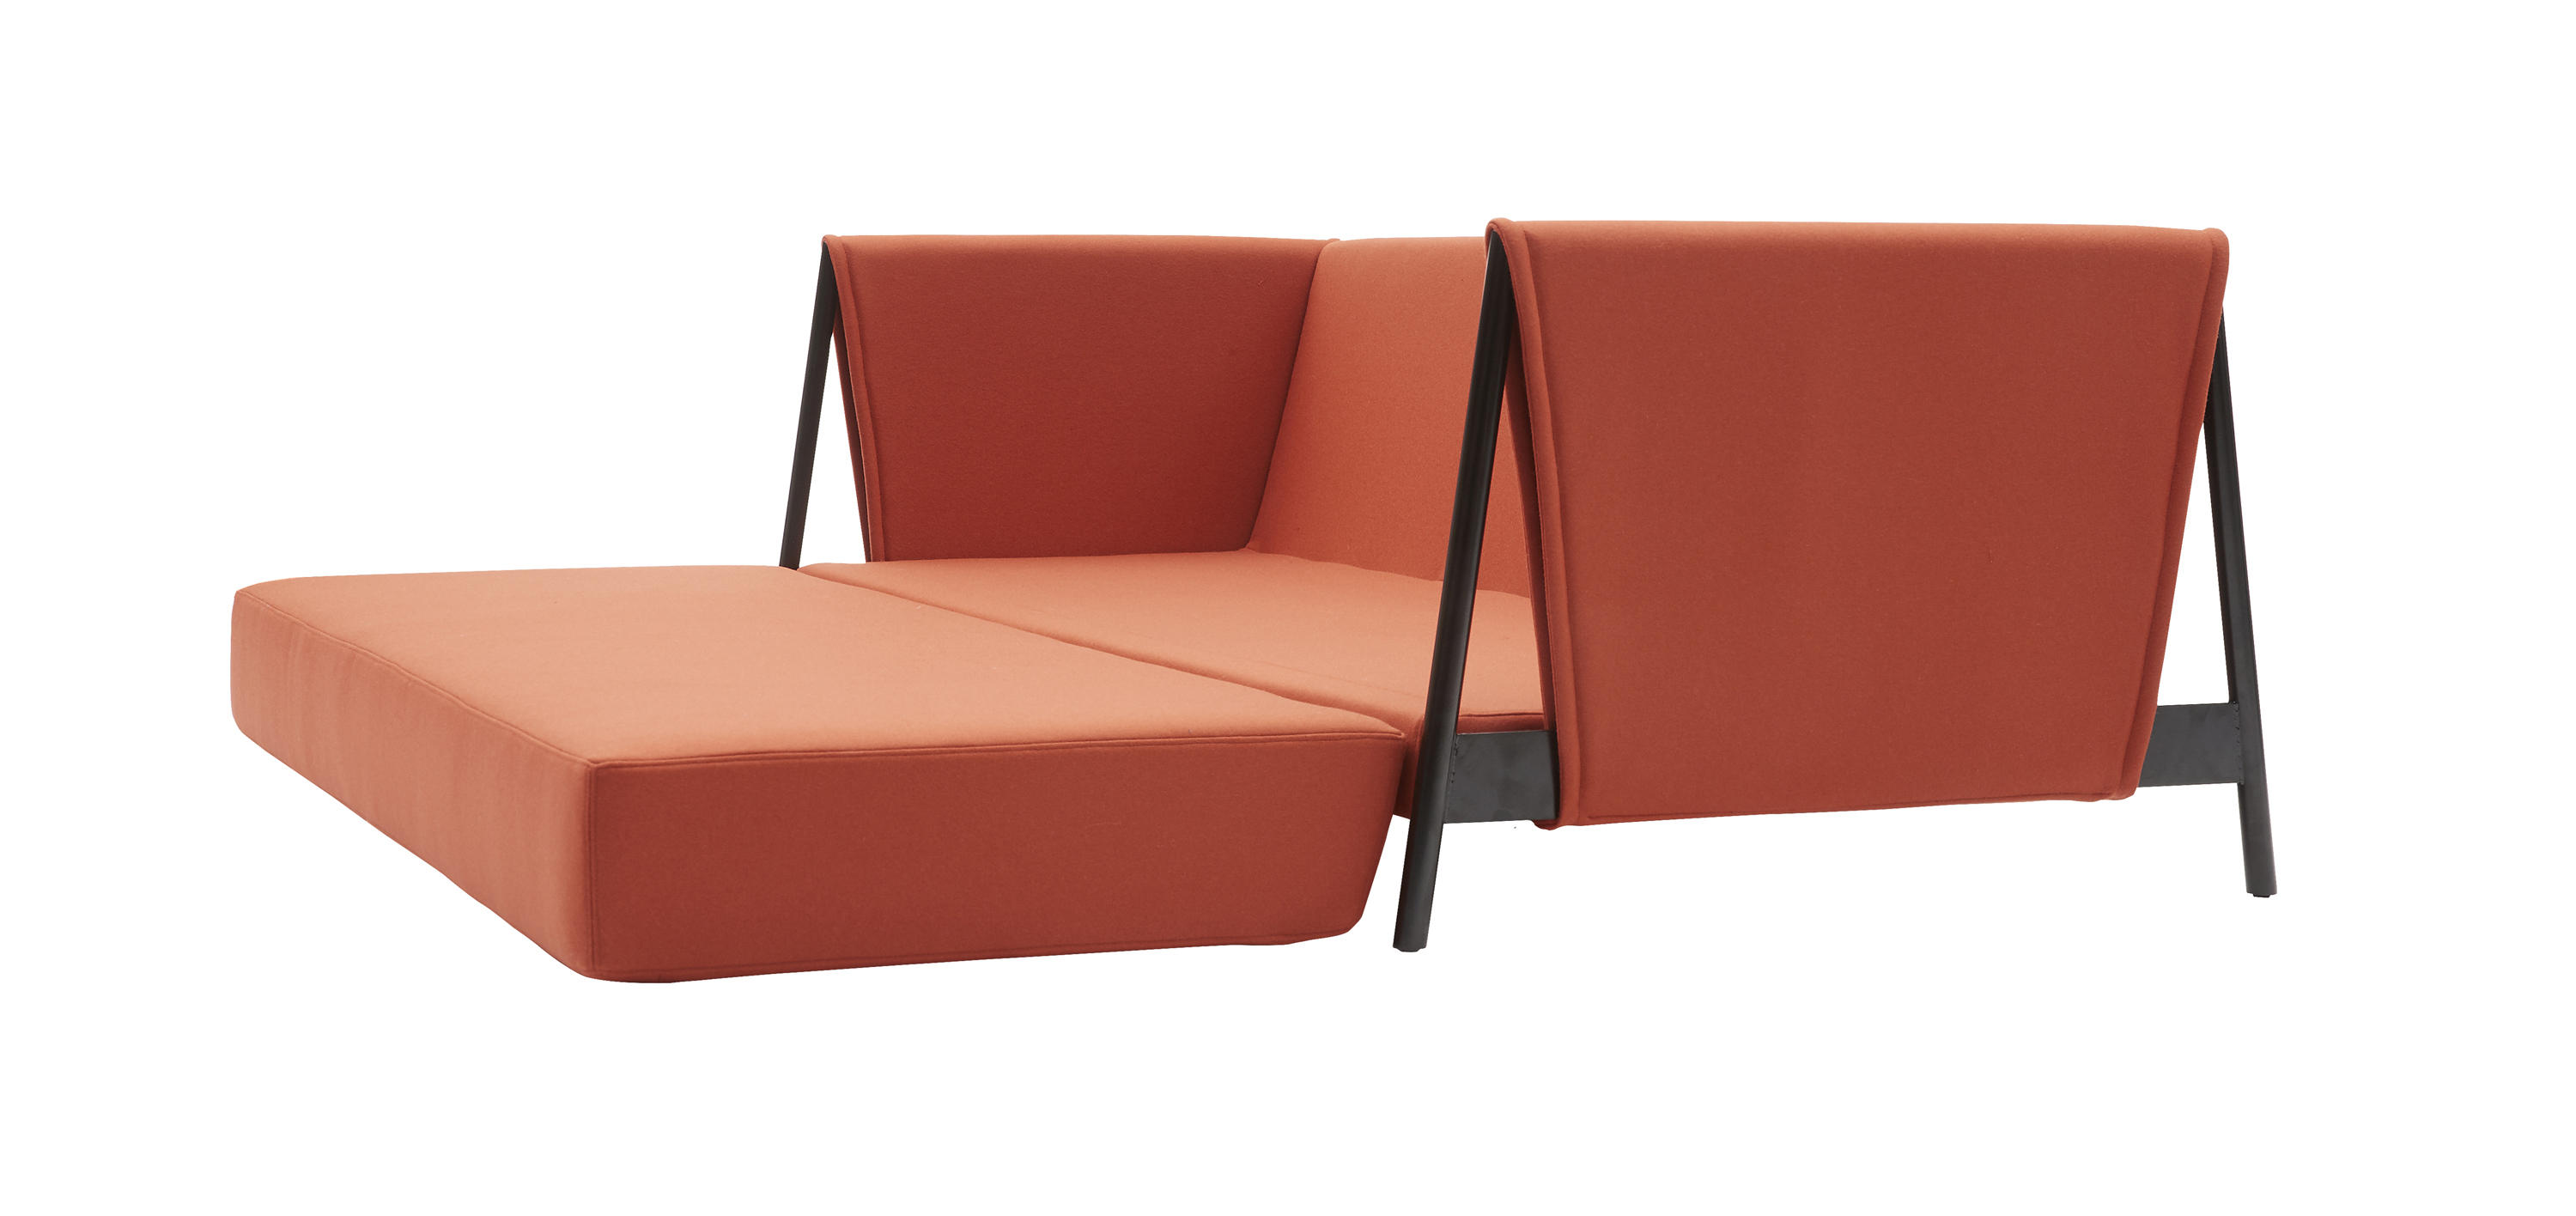 MADISON Sofa by Softline A/S